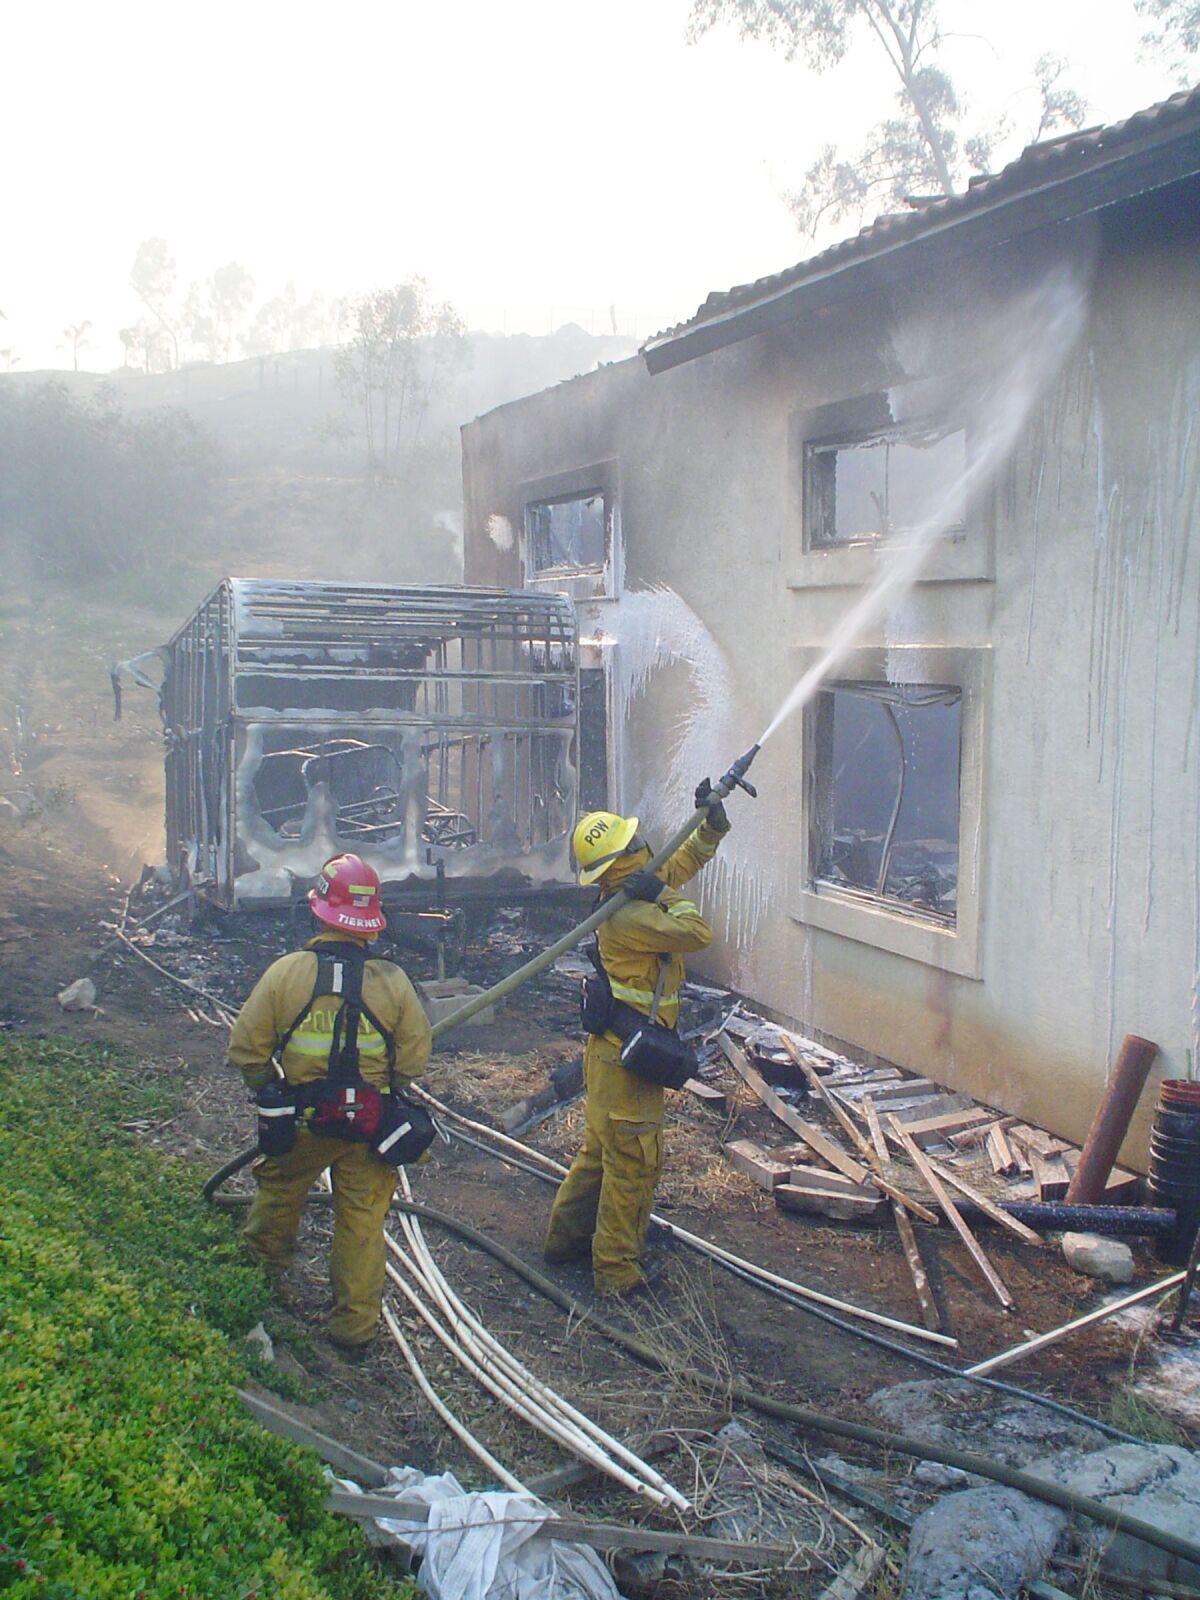 Poway firefighters extinguishing flames at a home during the Witch Creek fire in 2007.